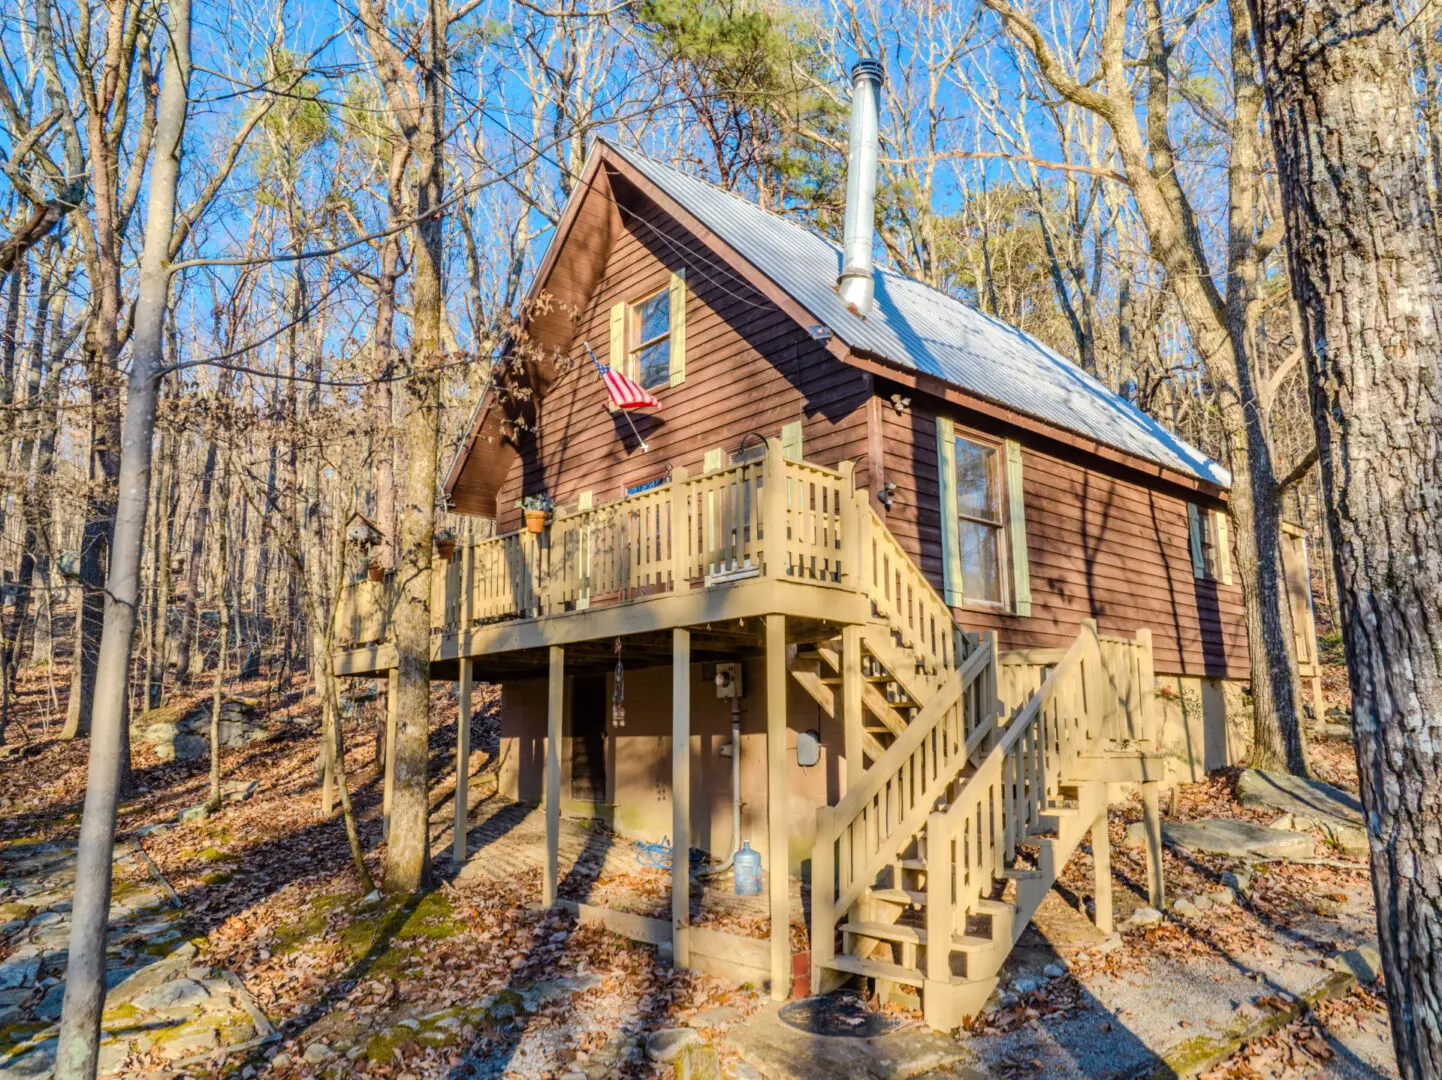 Cabin Rentals in Mentone with stairs leading up to it.